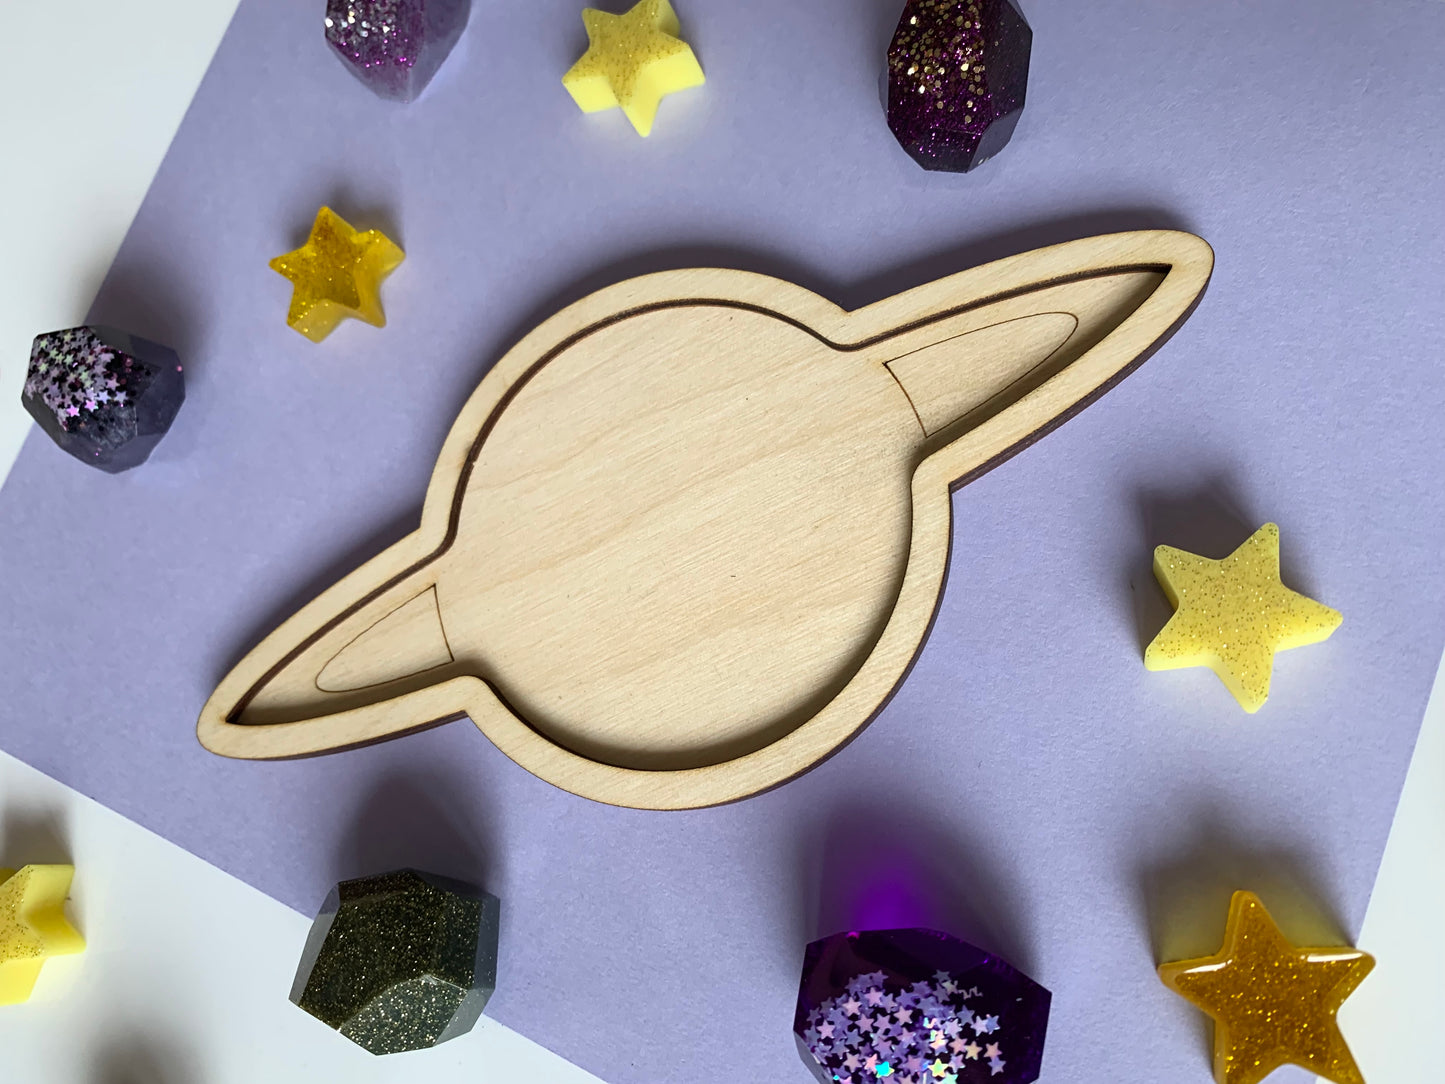 Space Play Trays